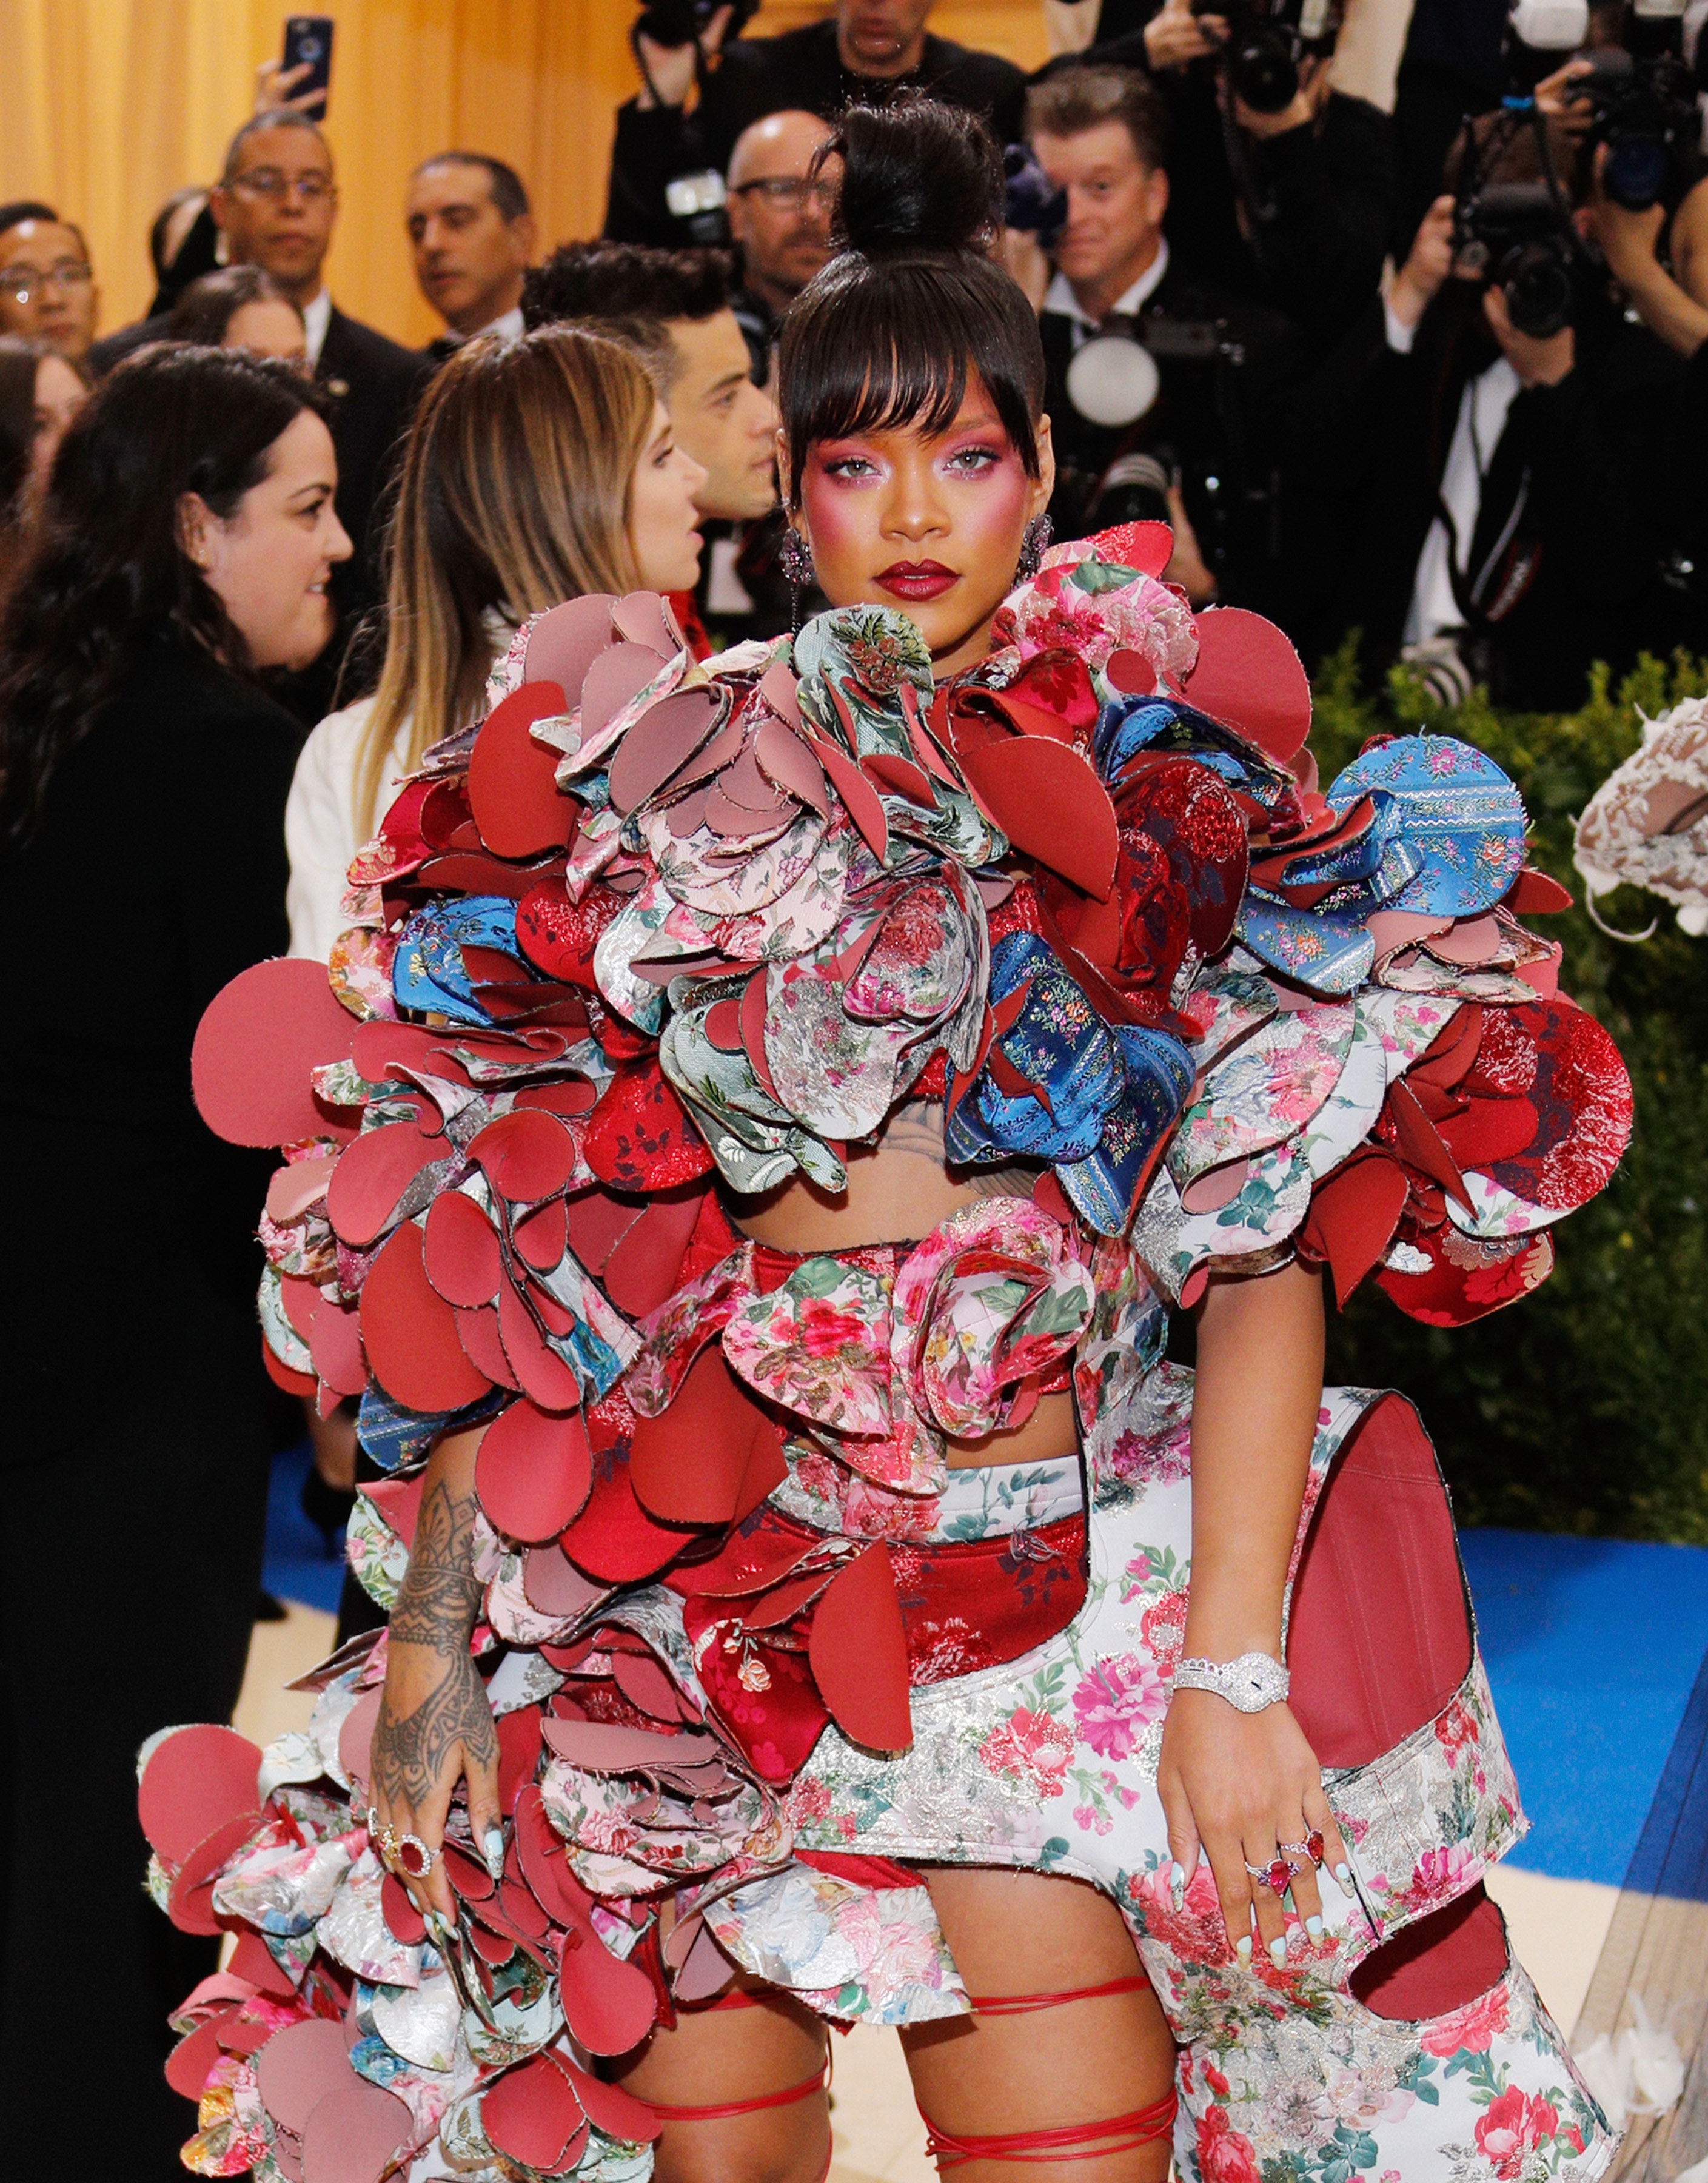 Rihanna attends Rei Kawakubo/Comme des Garçons:Art of the In-Between Costume Institute Gala at Metropolitan Museum of Art on May 1, 2017 in New York City